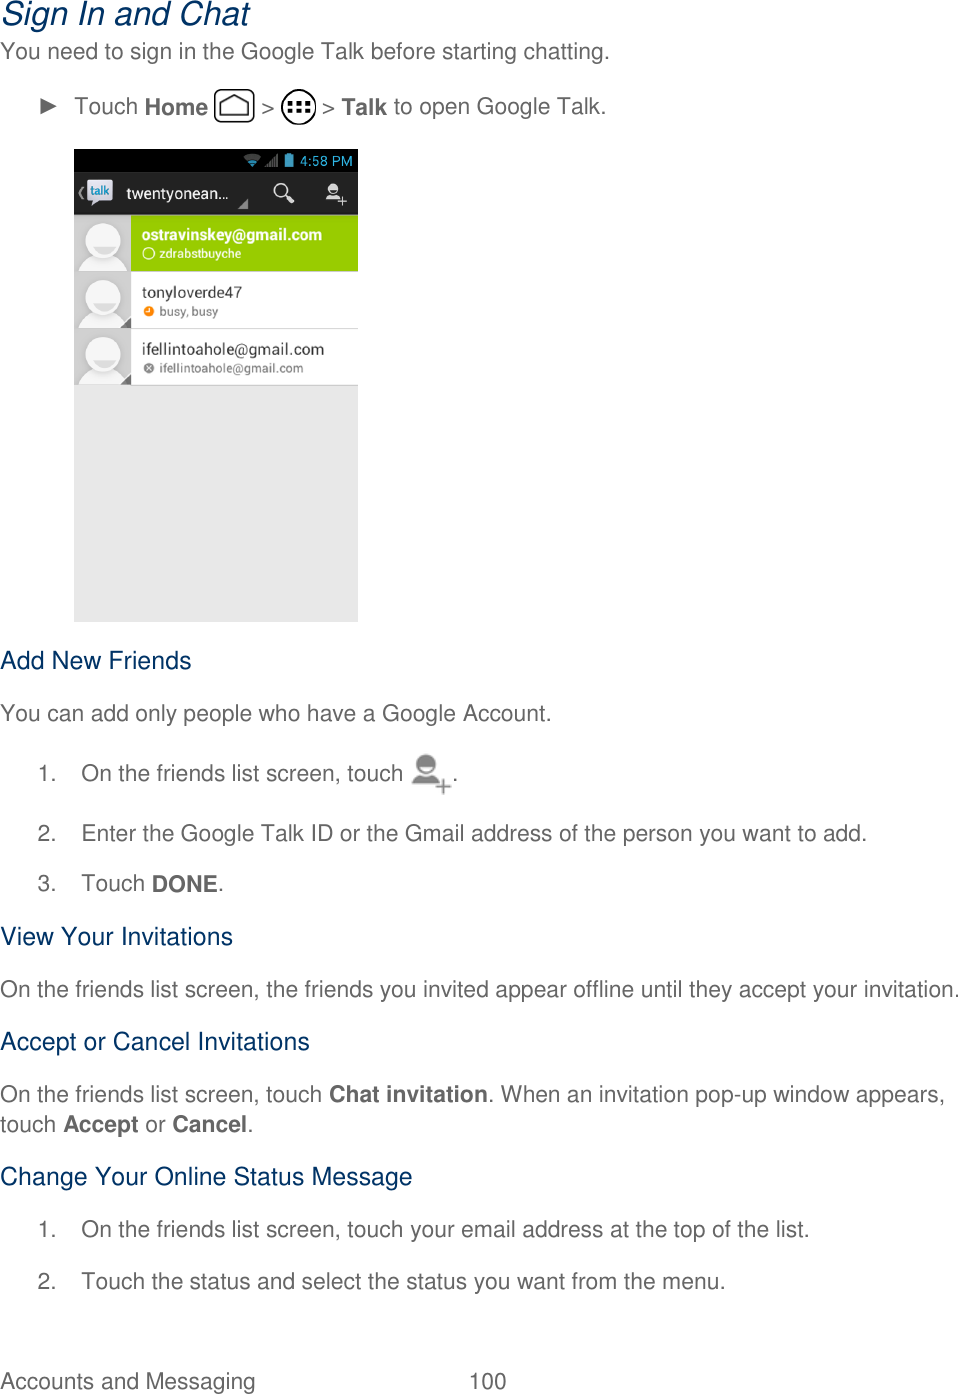 Accounts and Messaging  100   Sign In and Chat You need to sign in the Google Talk before starting chatting. ►  Touch Home   &gt;   &gt; Talk to open Google Talk.  Add New Friends You can add only people who have a Google Account. 1.  On the friends list screen, touch  . 2.  Enter the Google Talk ID or the Gmail address of the person you want to add. 3.  Touch DONE. View Your Invitations On the friends list screen, the friends you invited appear offline until they accept your invitation. Accept or Cancel Invitations On the friends list screen, touch Chat invitation. When an invitation pop-up window appears, touch Accept or Cancel. Change Your Online Status Message 1.  On the friends list screen, touch your email address at the top of the list. 2.  Touch the status and select the status you want from the menu. 